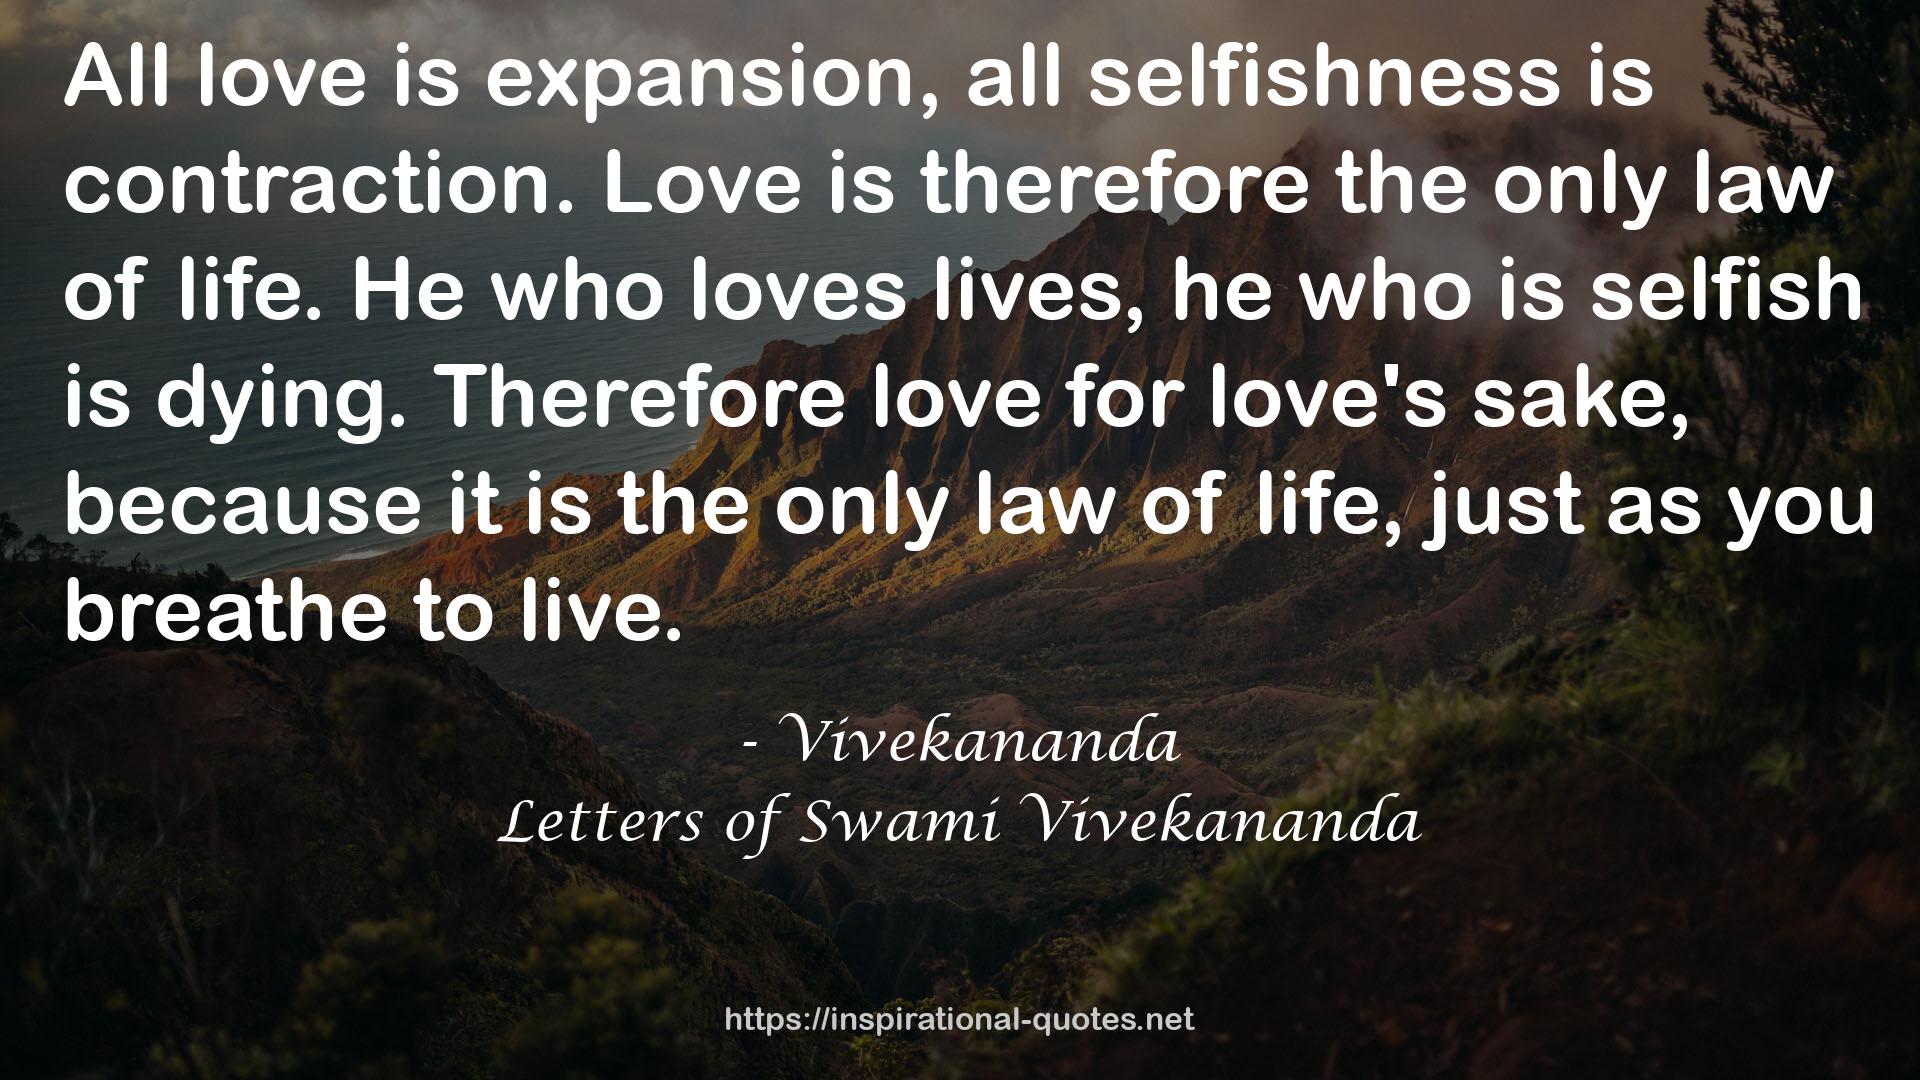 Letters of Swami Vivekananda QUOTES